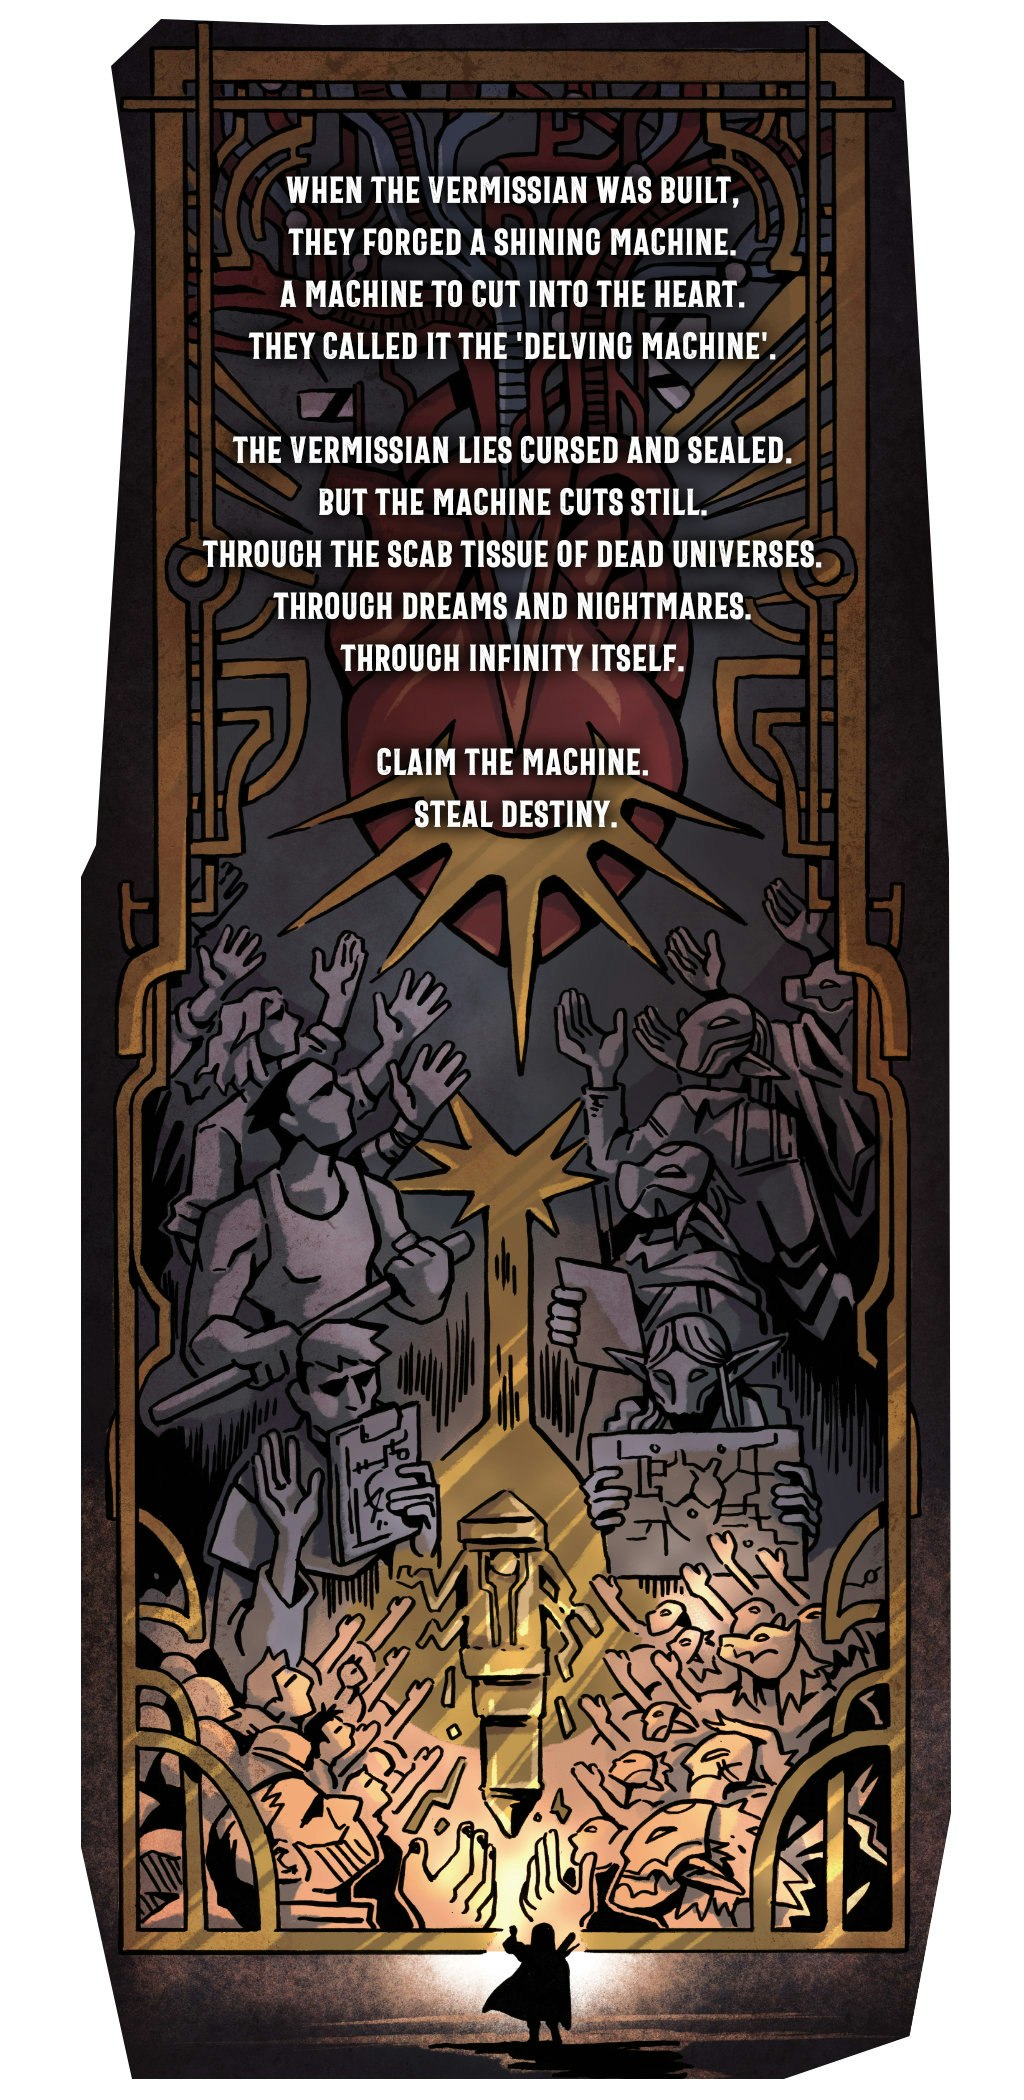 A long illustration of a mural with text floating atop it. The mural depicts a stylized history of the creation of the Delving Machine. The text reads: When the Vermissian was built, they forged a shining machine, a machine to cut into the Heart. They called it the Delving Machine. The Vermissian lies cursed and sealed. But the Machine cuts still. Through the scab tissue of dead universes, through dreams and nightmares. Through infinity itself. Claim the machine. Steal destiny.